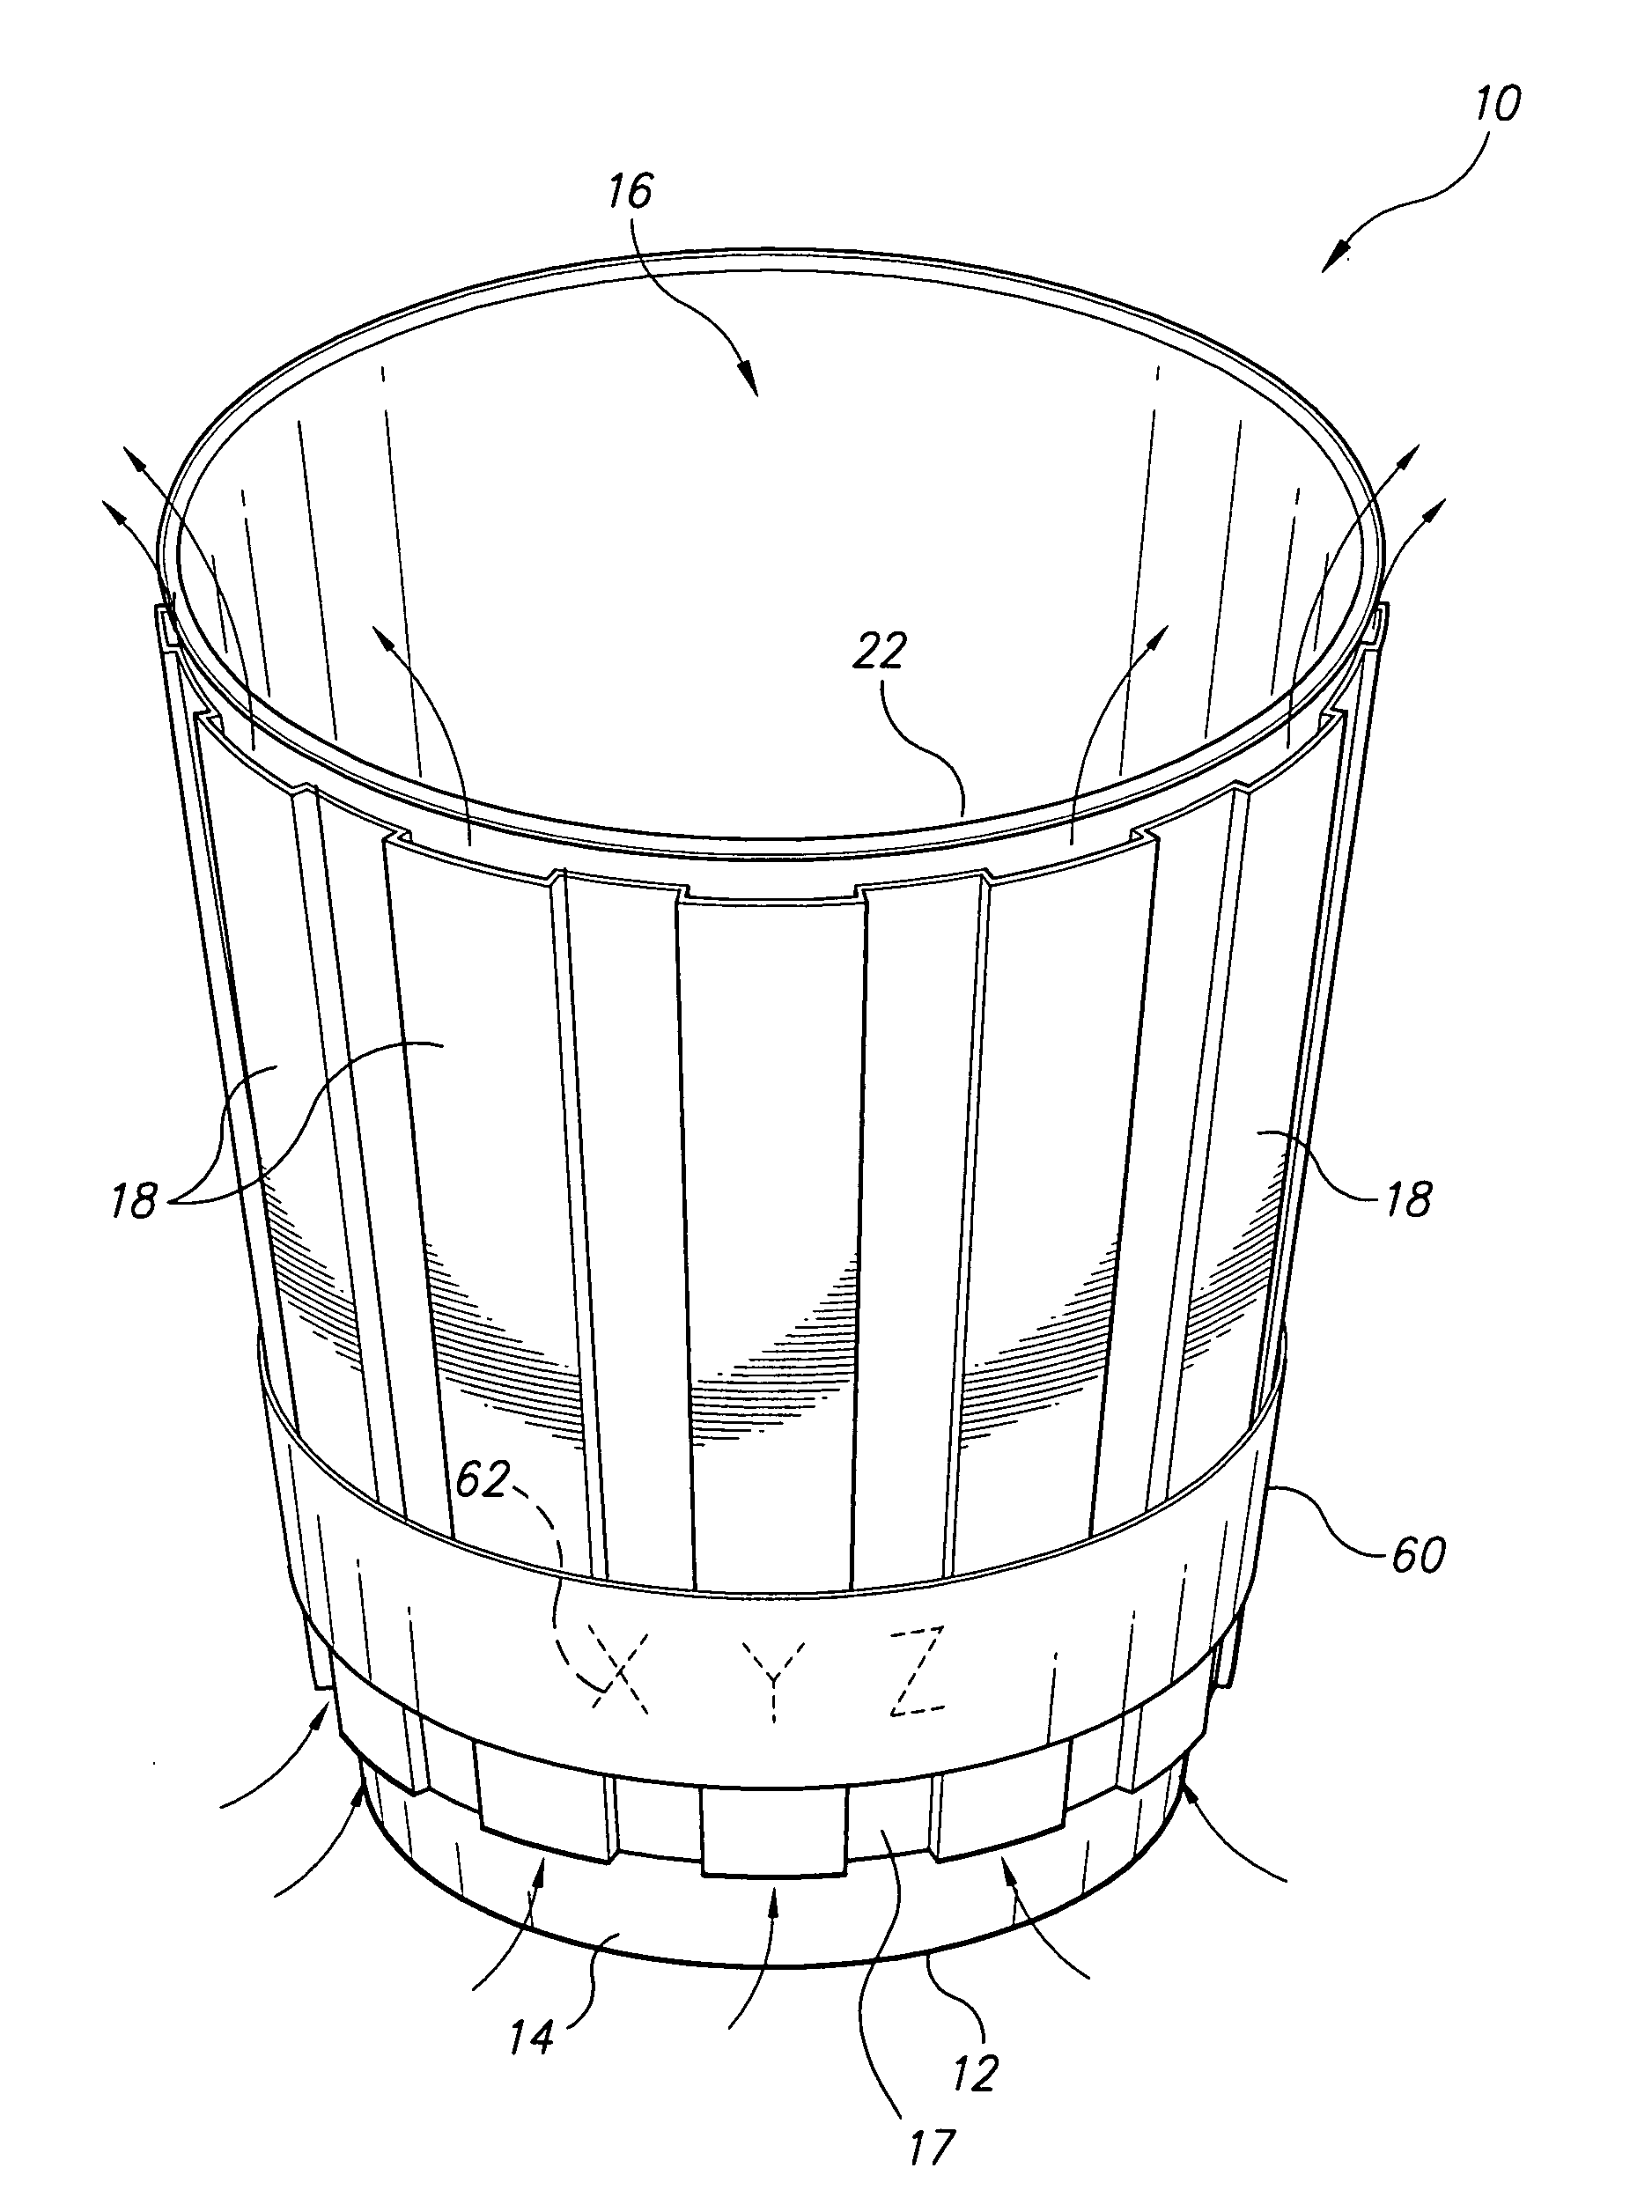 Insulated beverage container